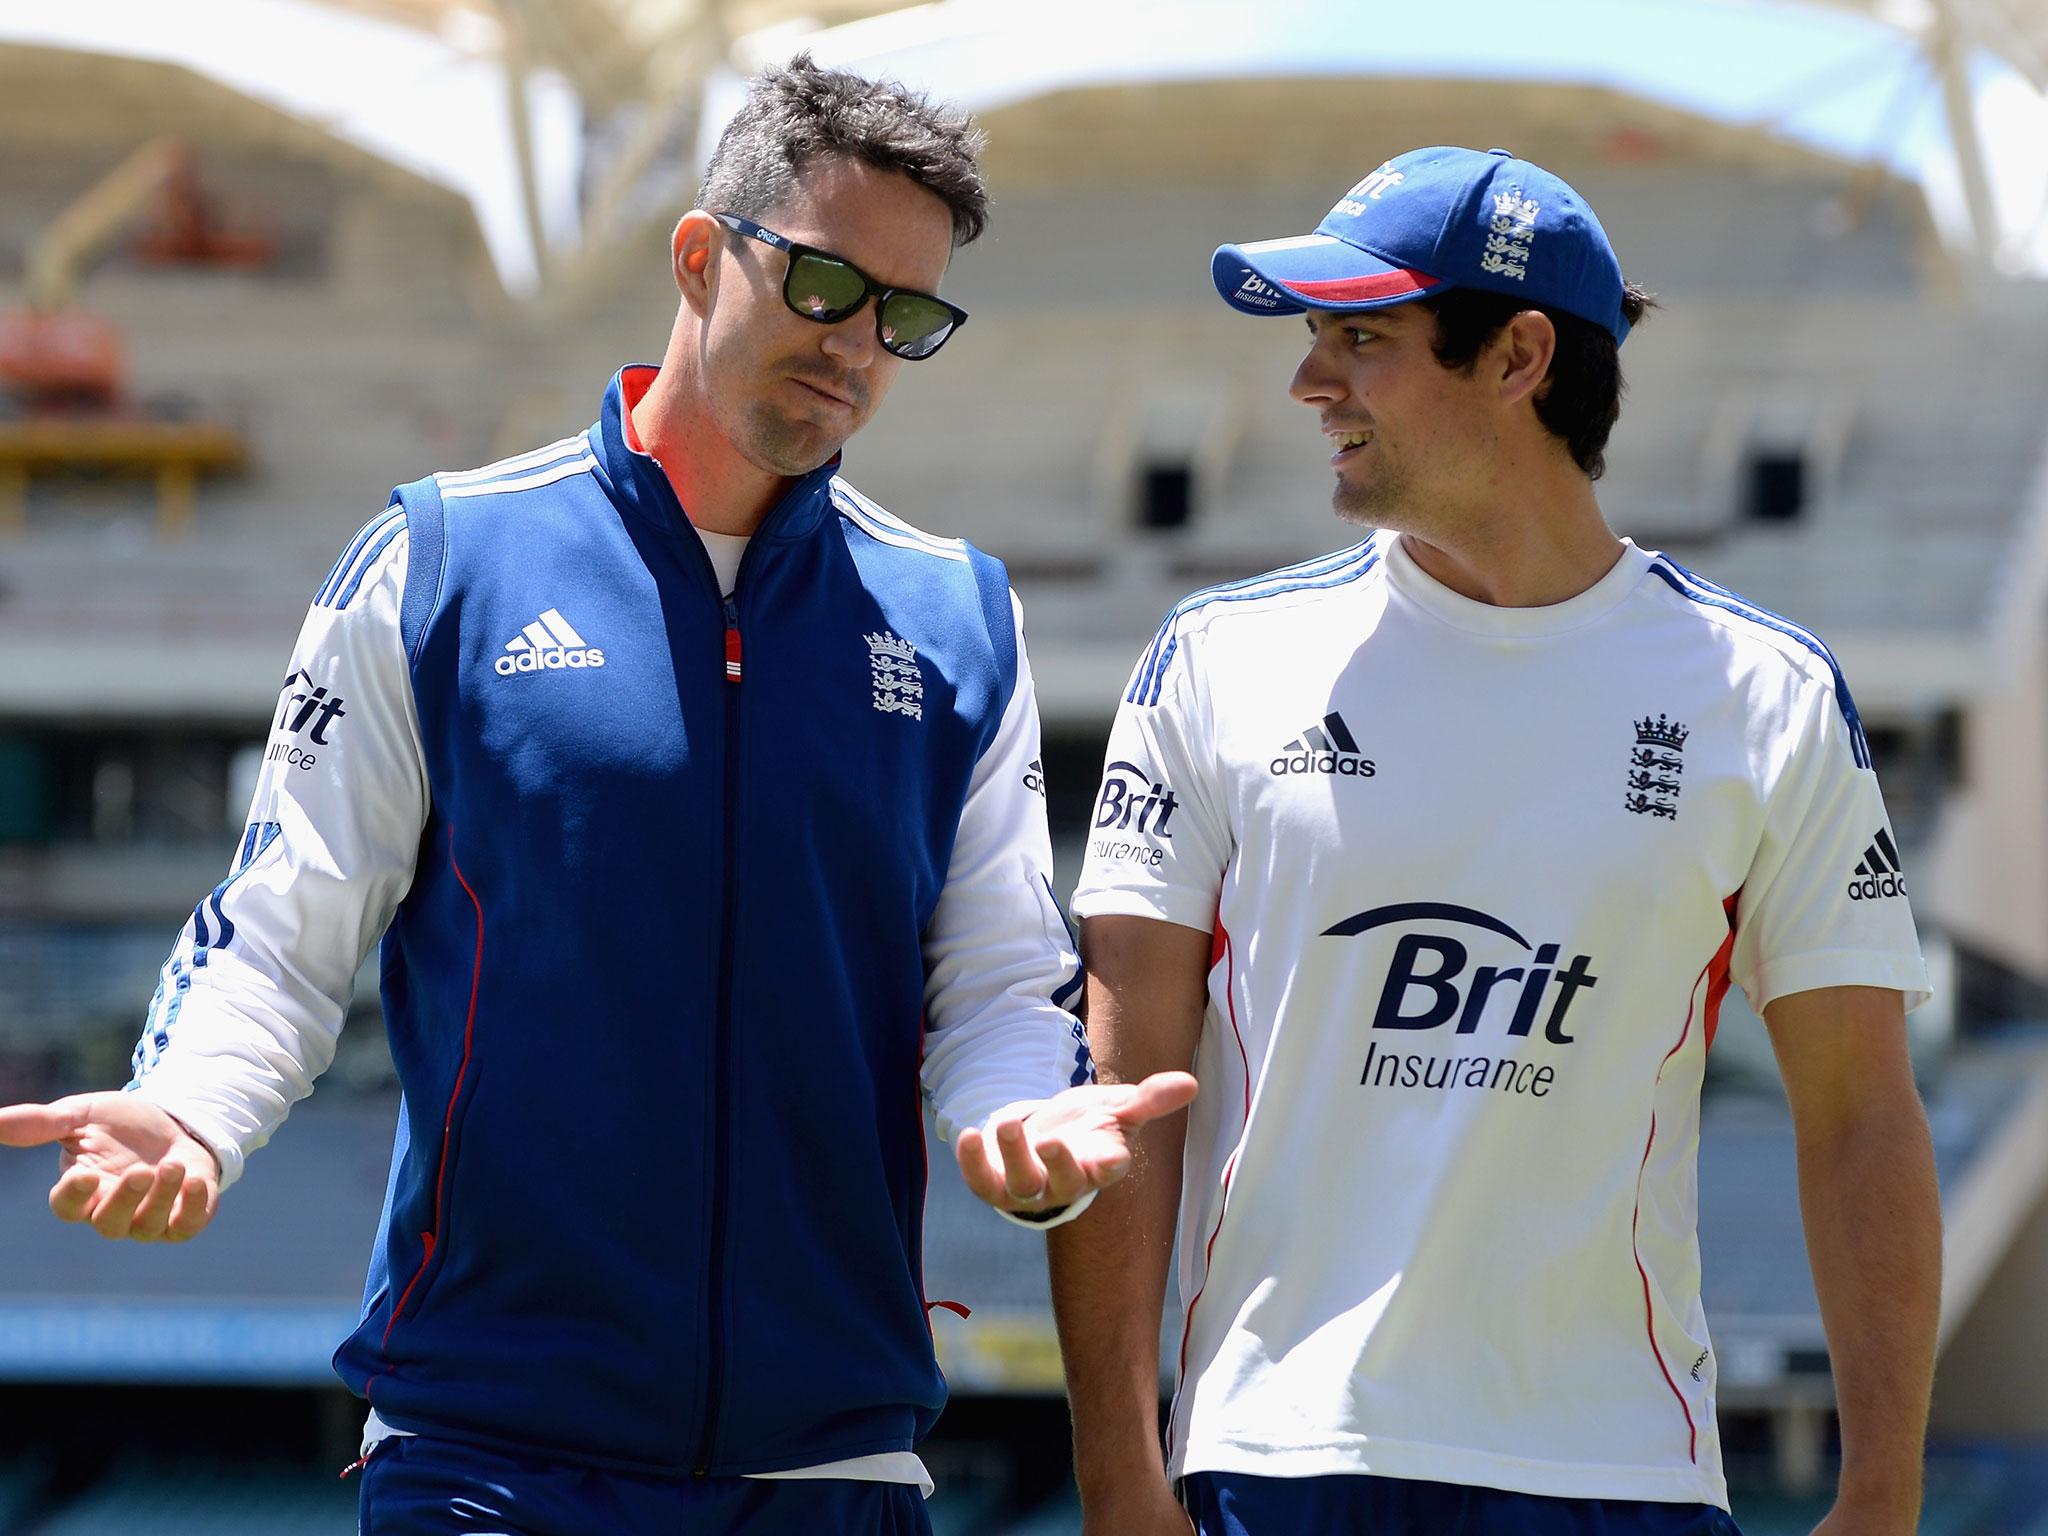 Kevin Pietersen used Alastair Cook's resignation as a chance to push his own chances of an England recall